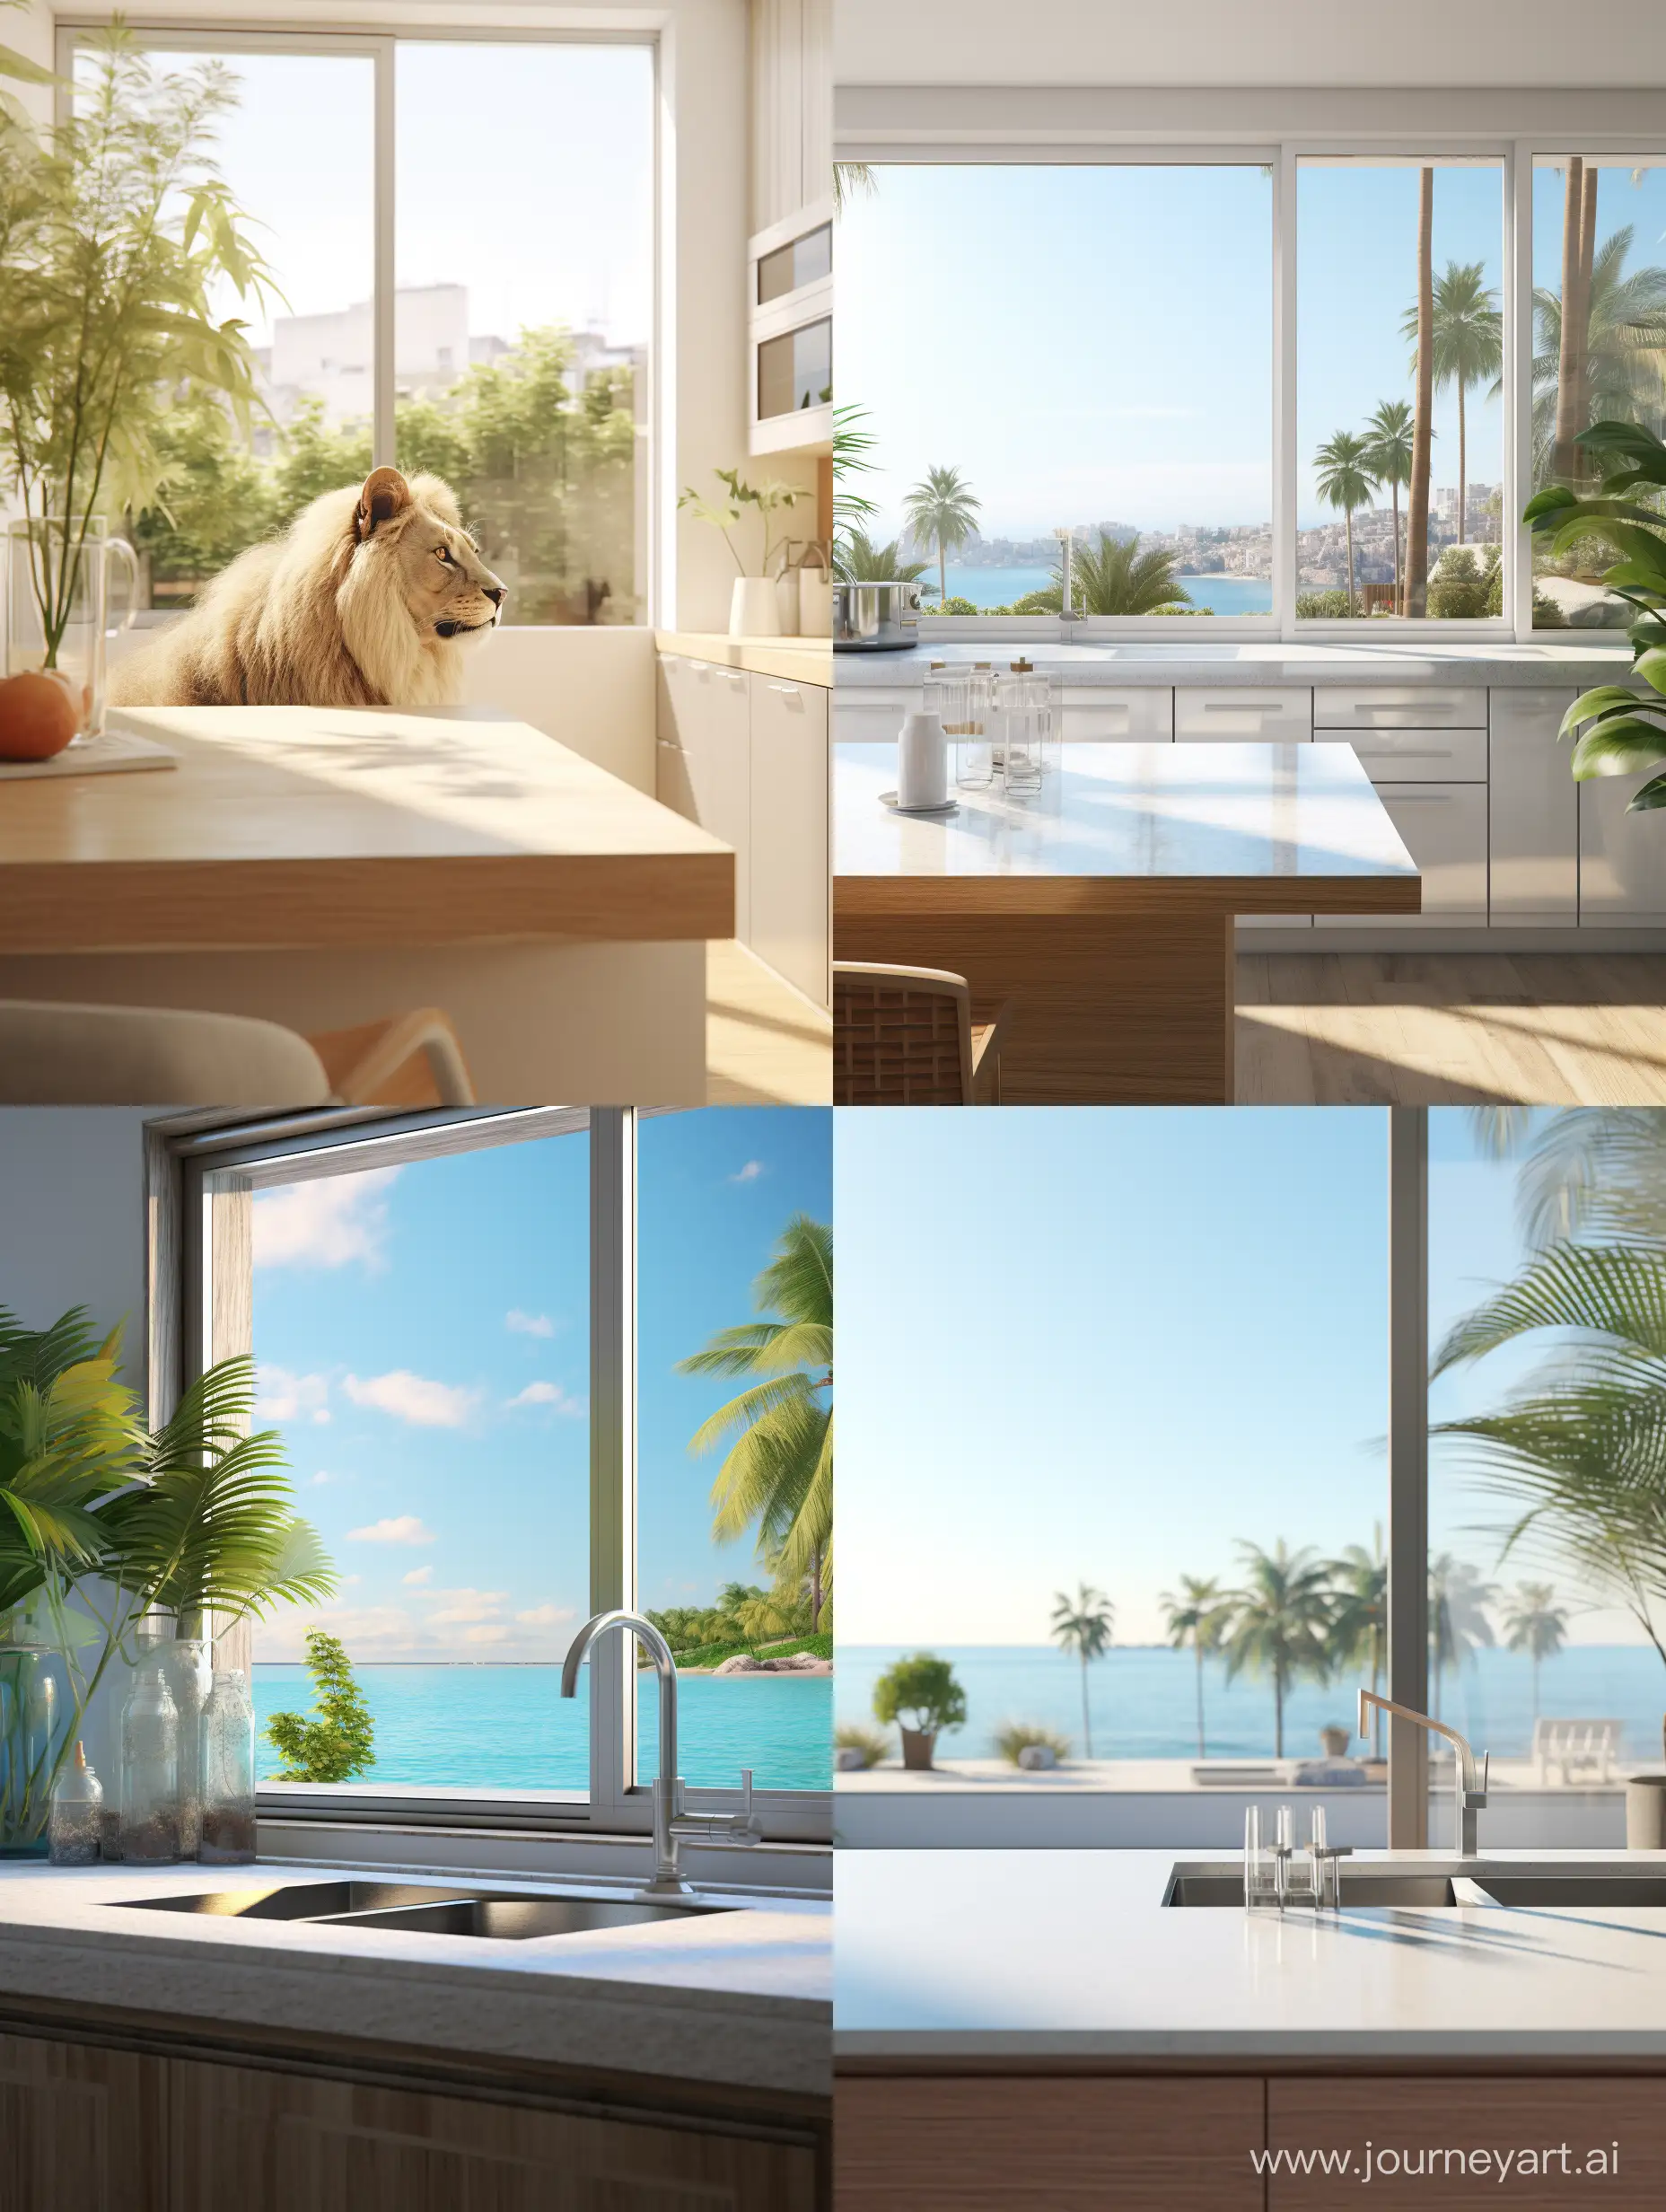 Realistic-Lion-in-Modern-White-Kitchen-with-Sea-View